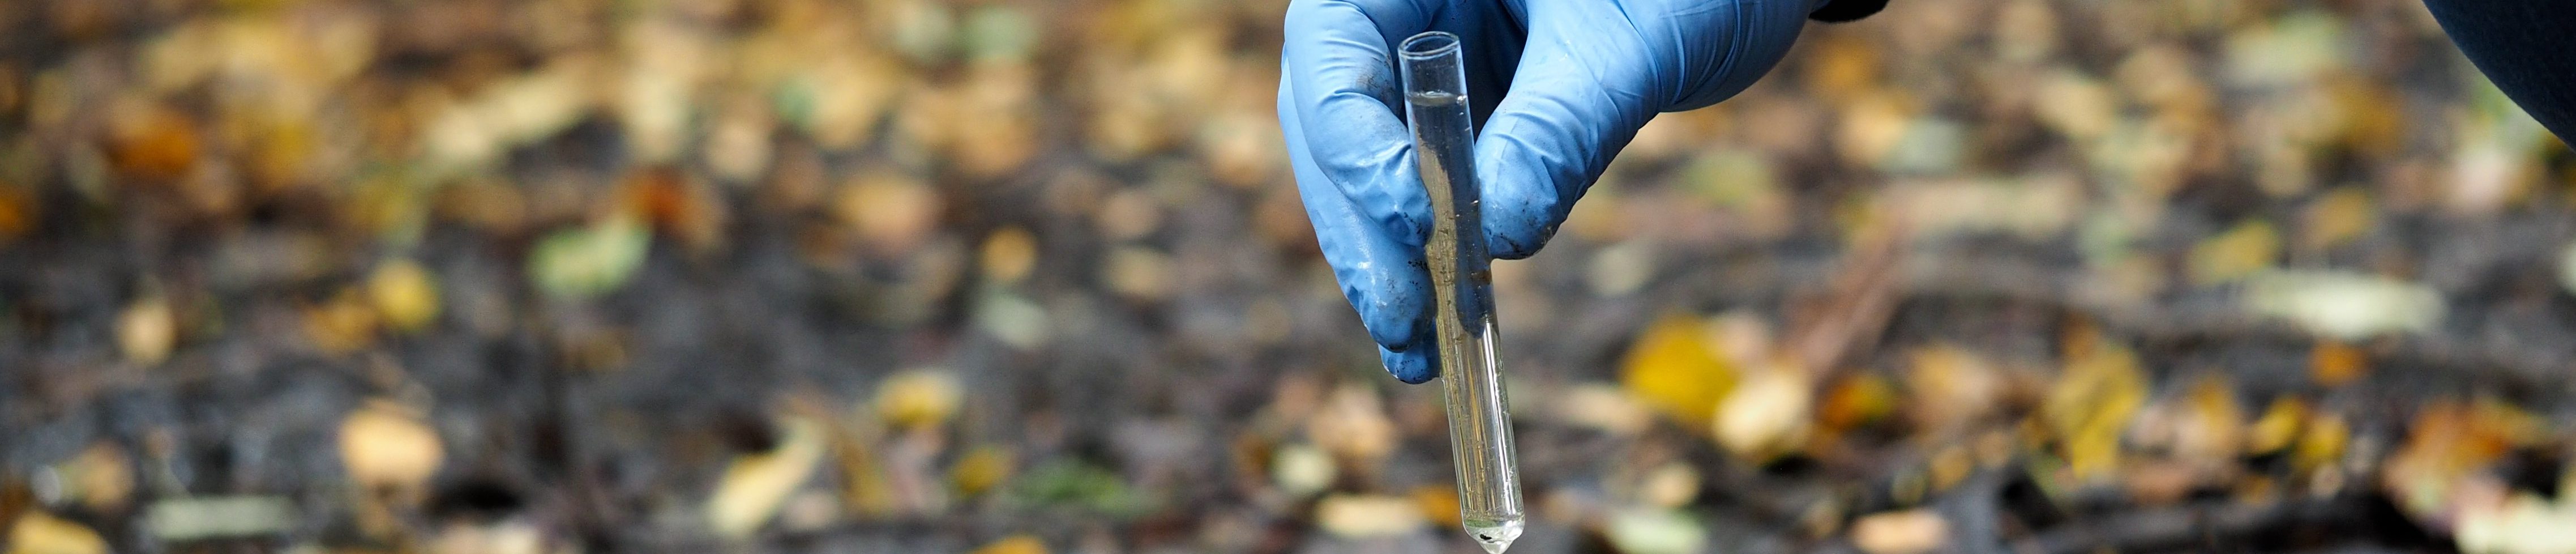 Water sample. Hand in glove collects water from a puddle in a test tube. Analysis of water purity, environment, ecology - concept. Water testing for infections, harmful emissions